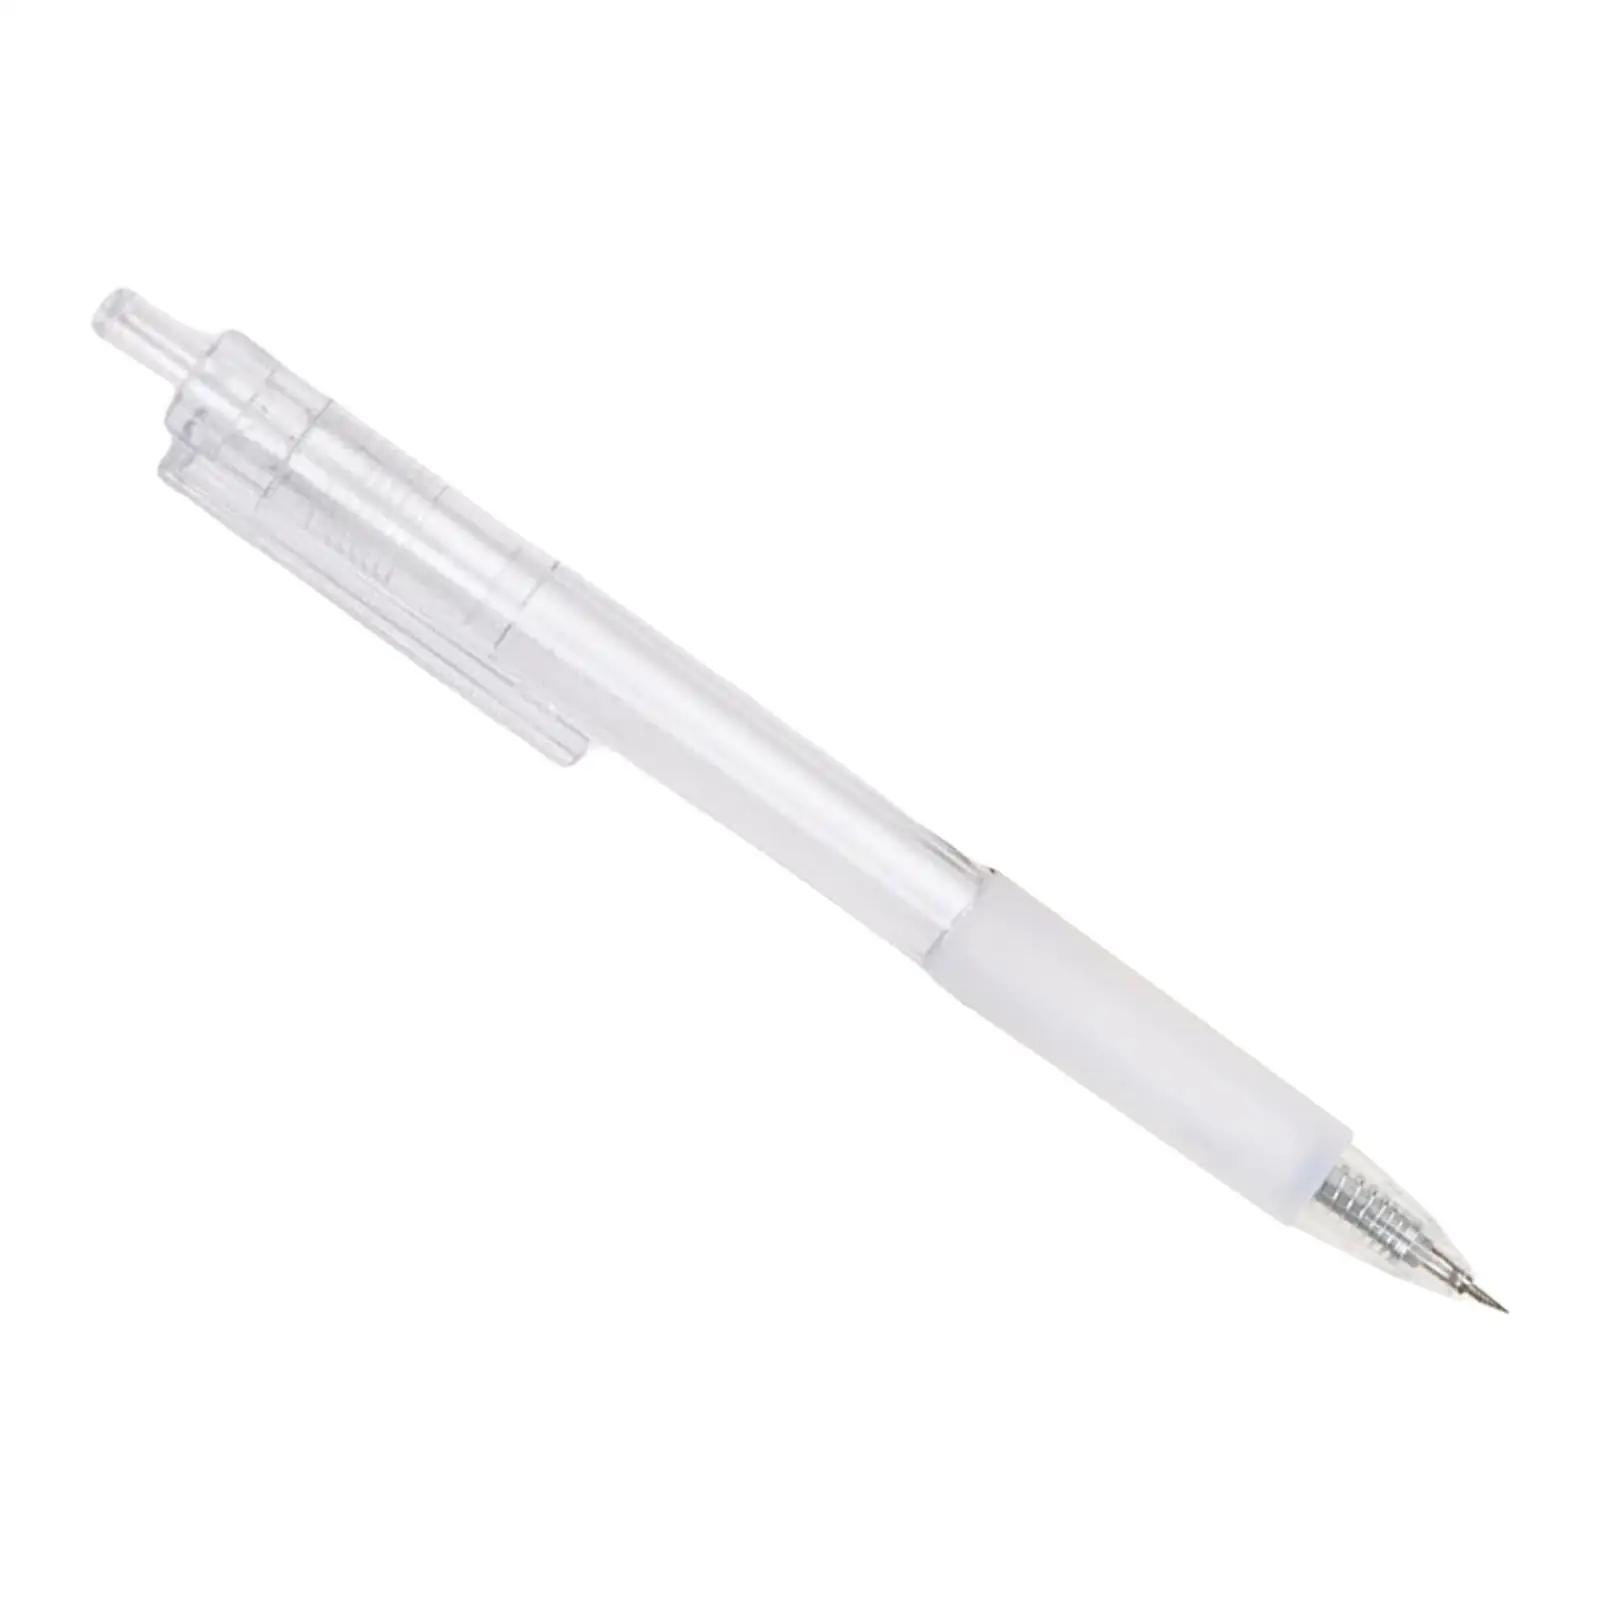 Portable Paper Cutter Pens Utility Retractable for Stencil Making Projects Washi Tape Cutter Card Making Artist Sticker